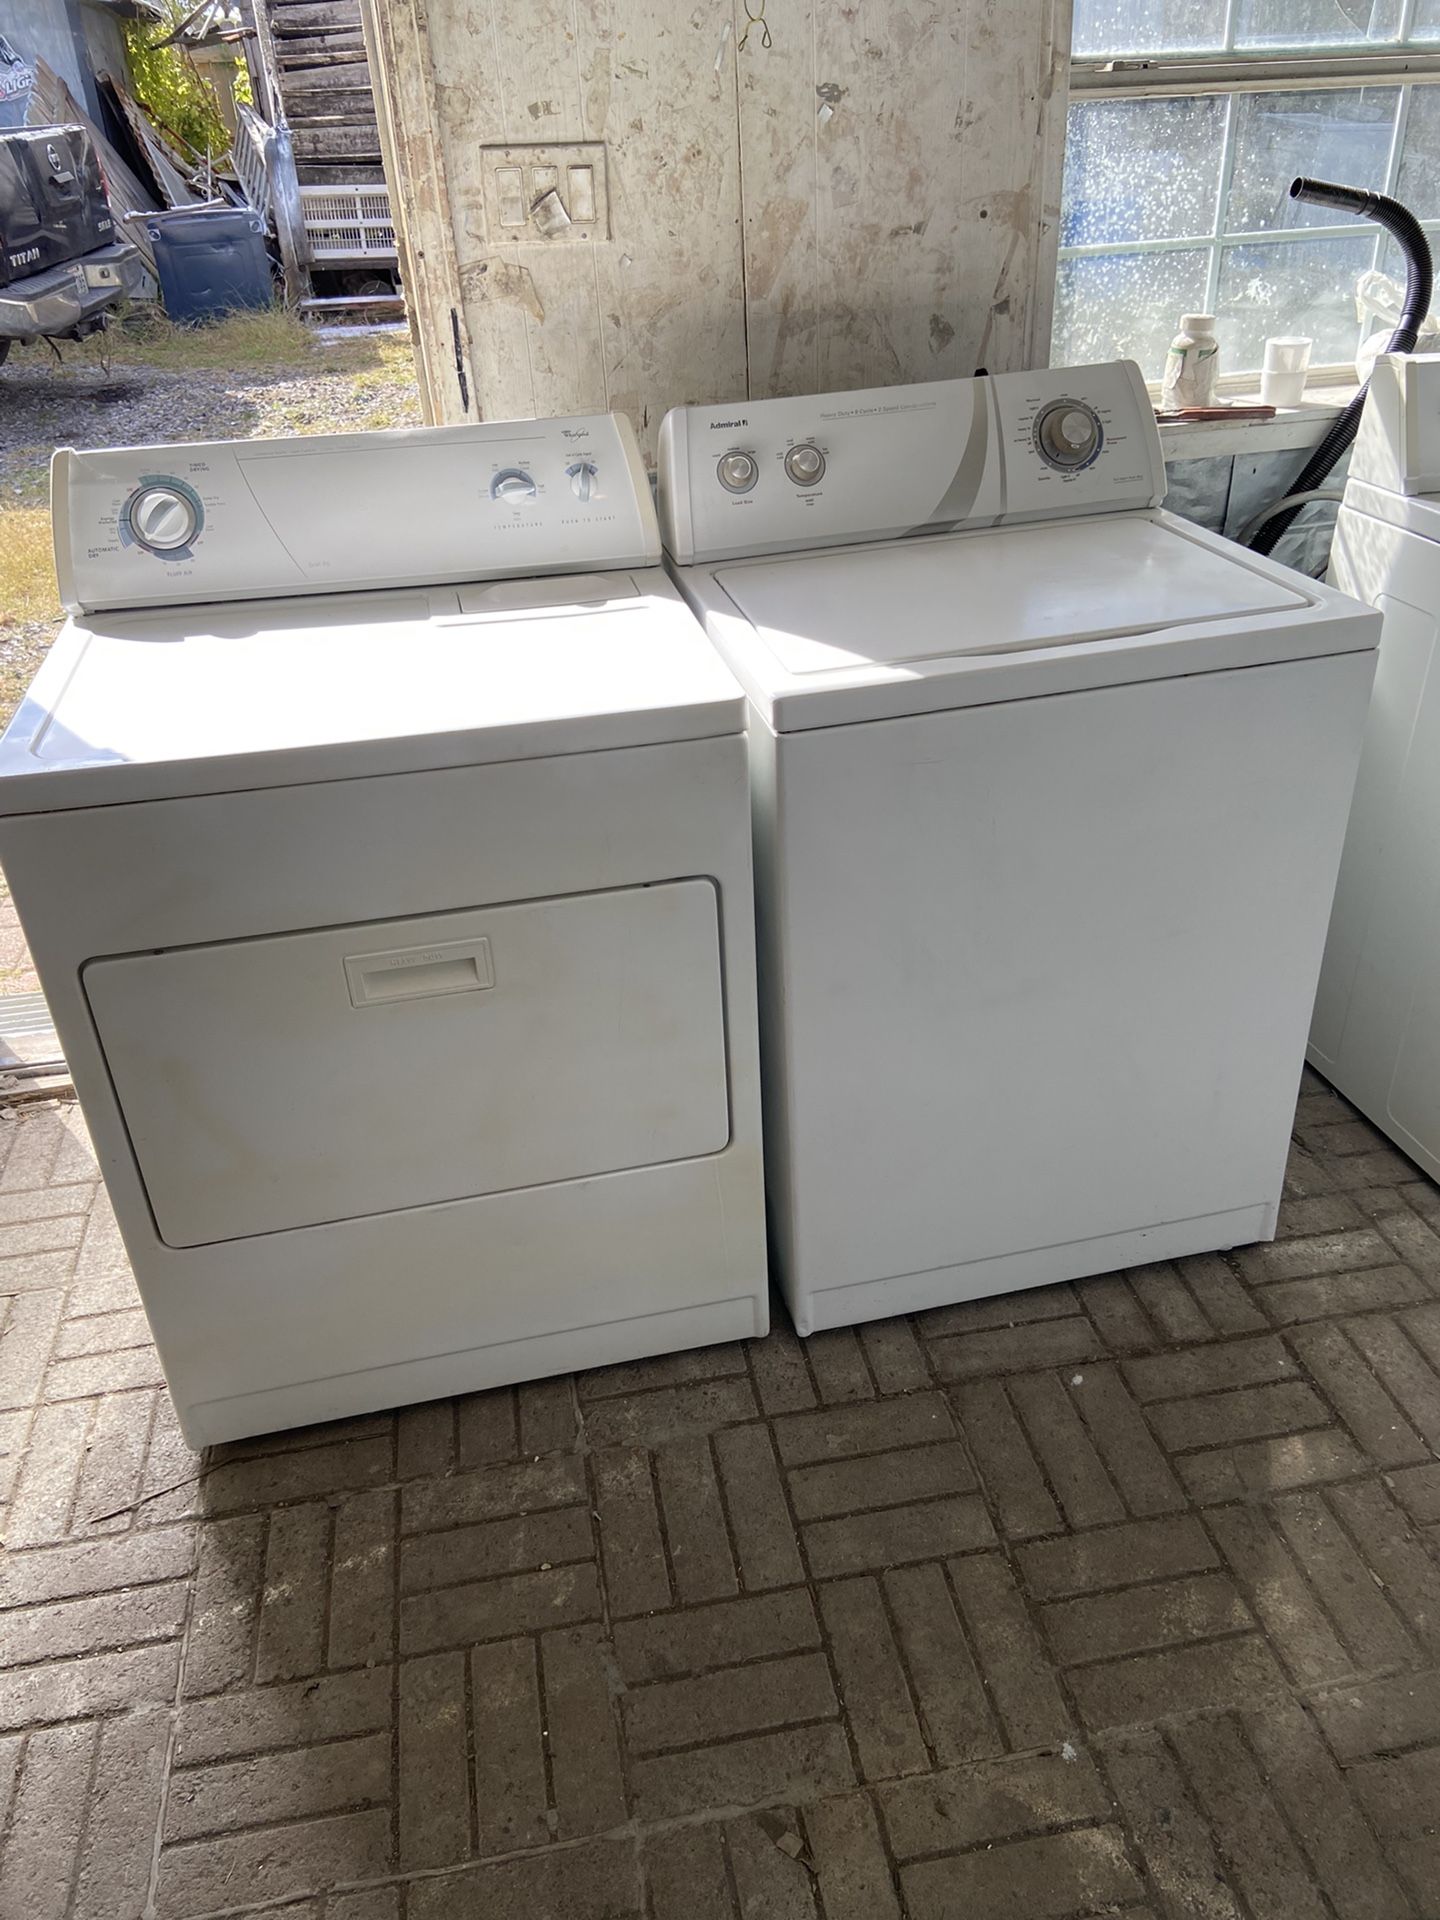 EXCELLENT  RUNNING  WHIRLPOOL  SUPER  CAPACITY  ELECTRIC DRYER  & WASHER SET! NO ISSUES WITH EITHER. BOTH RUN LIKE BRAND NEW! BOTH CLEANRD IN & OUT. T